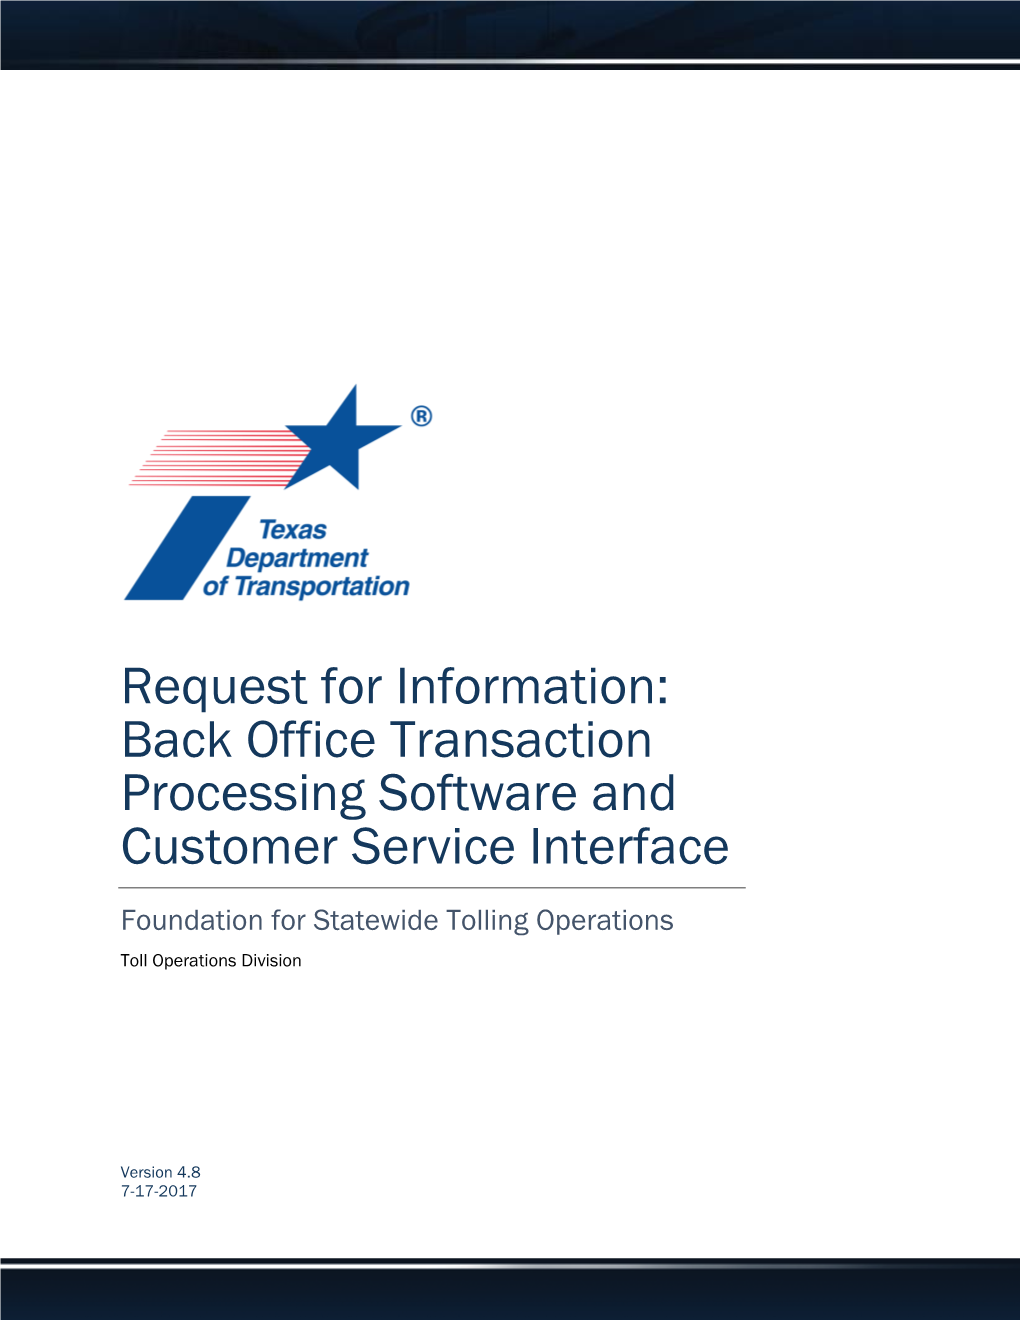 Request for Information: Back Office Transaction Processing Software and Customer Service Interface